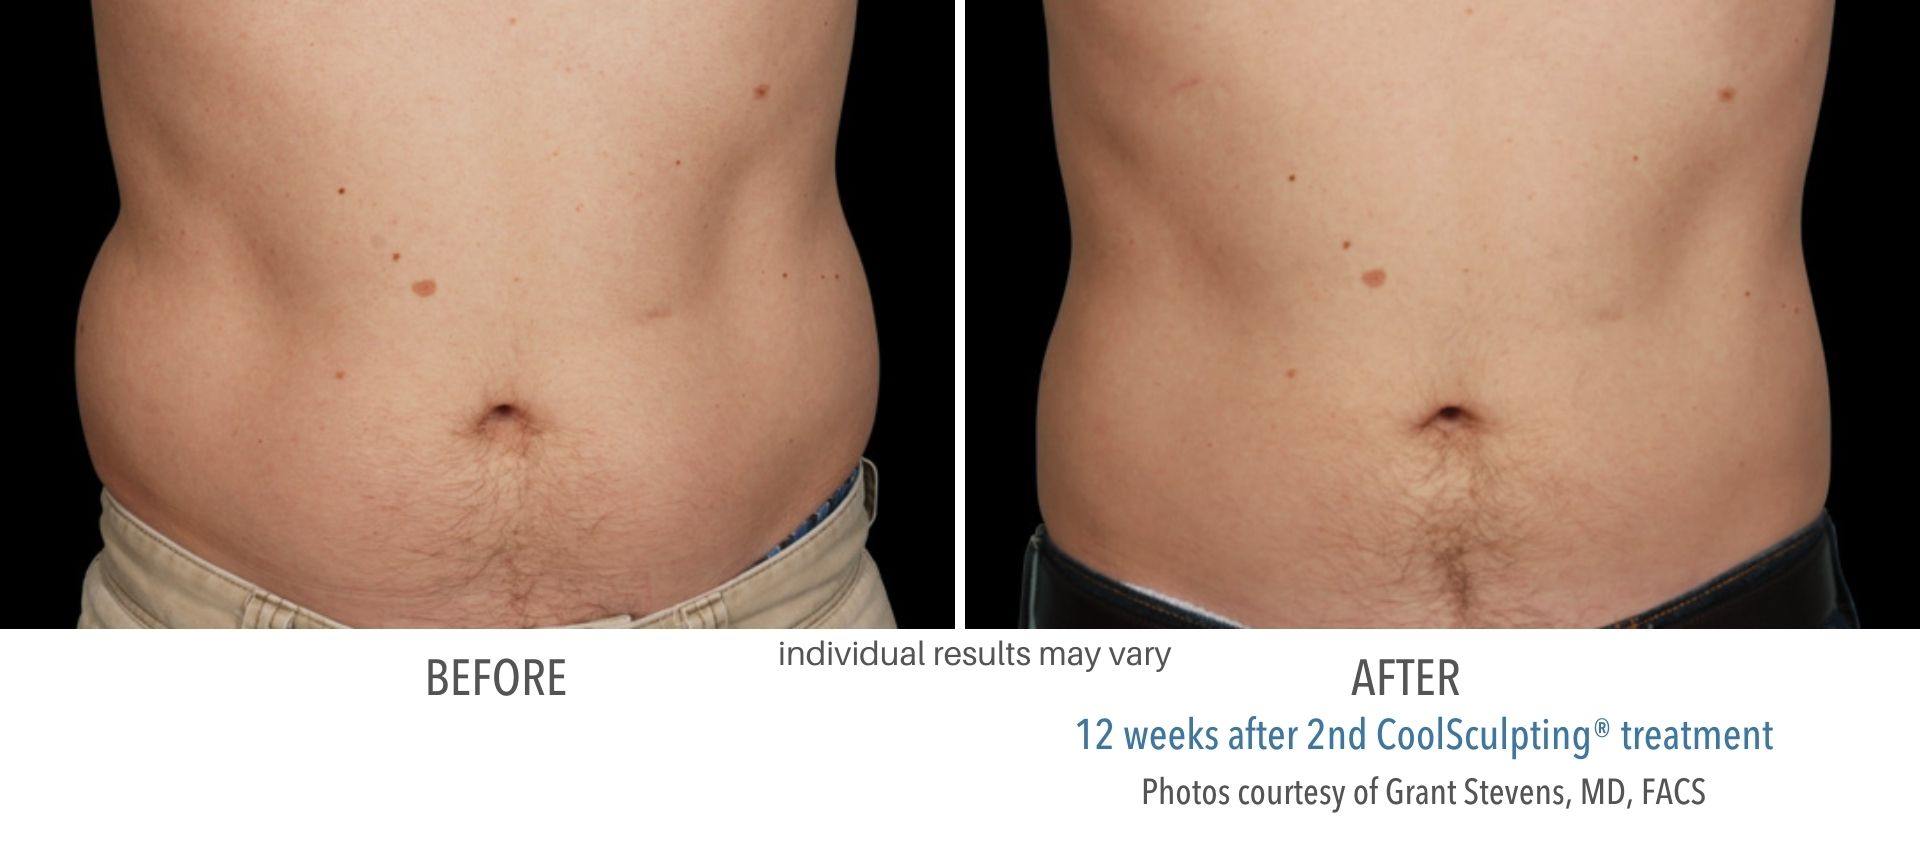 Coolsculpting treatment abdomen for men before and after treatment at Skin Suite RX.